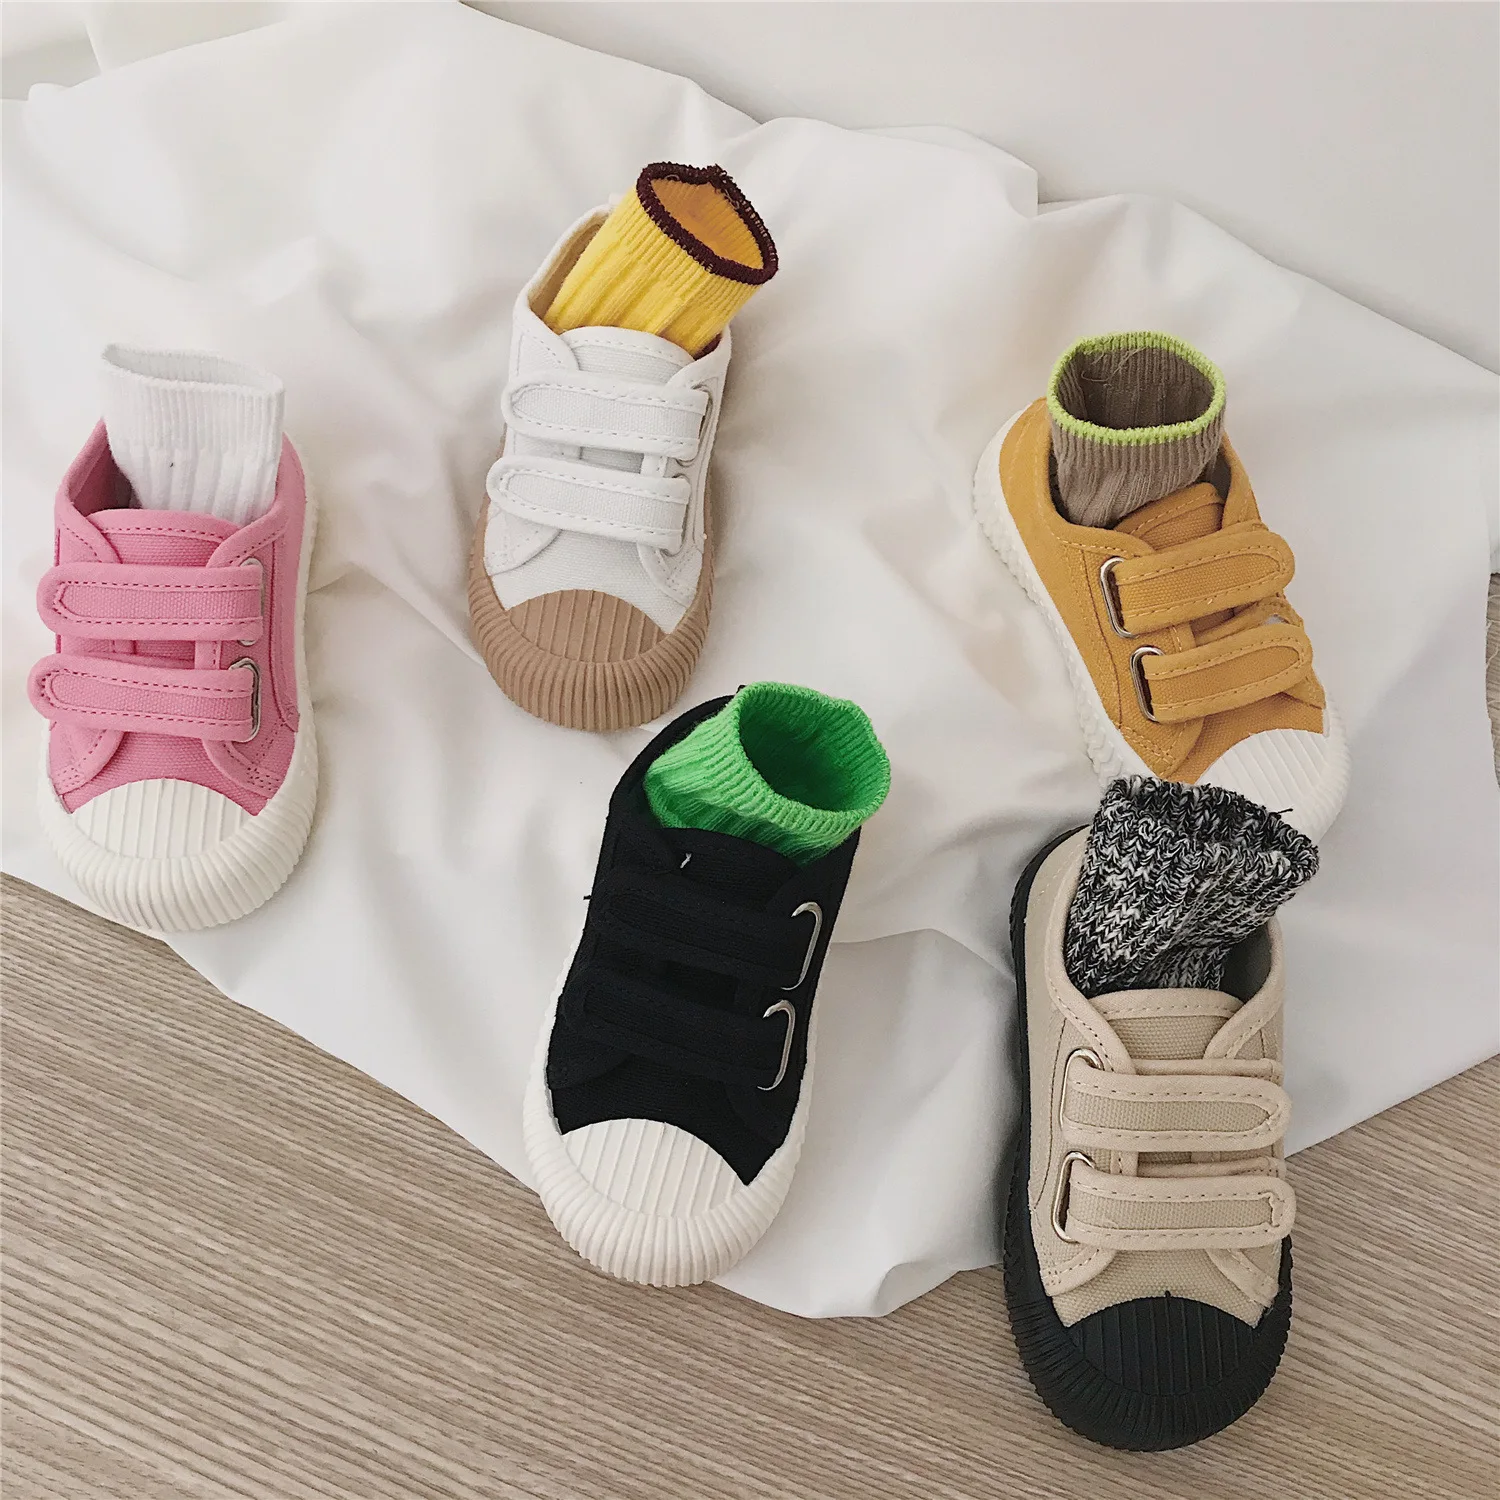 

Hot Sale 2020 Kids Shoes Boys Girls Casual Candy-colored Beef Tendon Bottom Canvas Shoes Children Sneakers Slip On Loafer, Customer's request